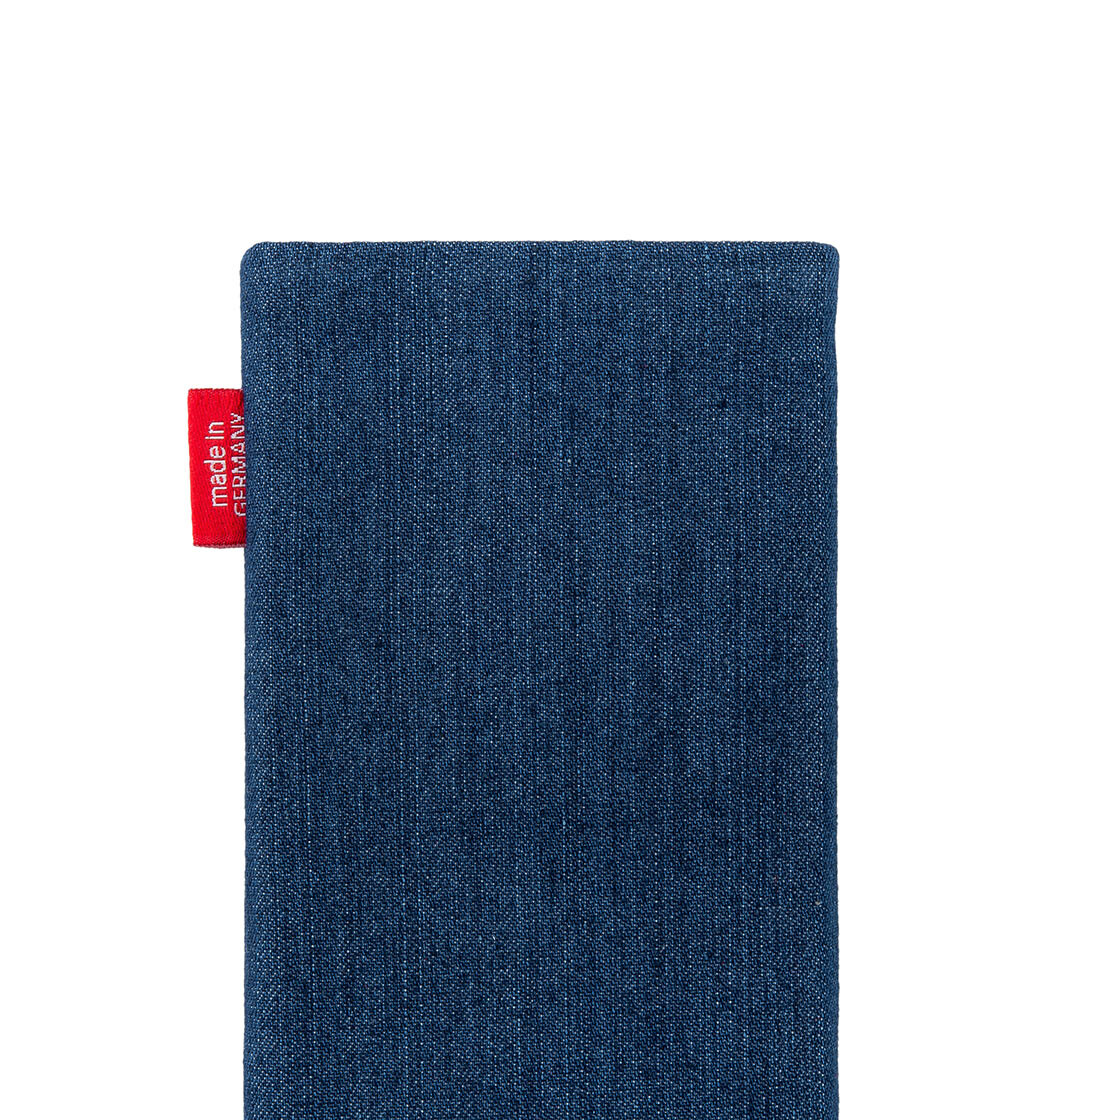 fitBAG Rock in denim - sleeve made of robust fabric, 14,90